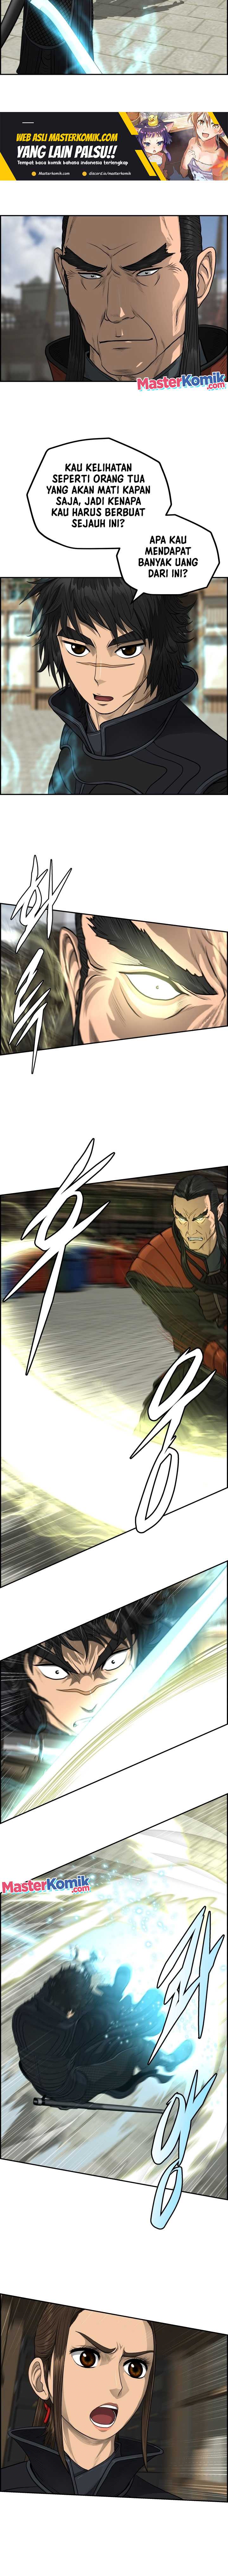 Blade Of Winds And Thunders Chapter 62 - 97